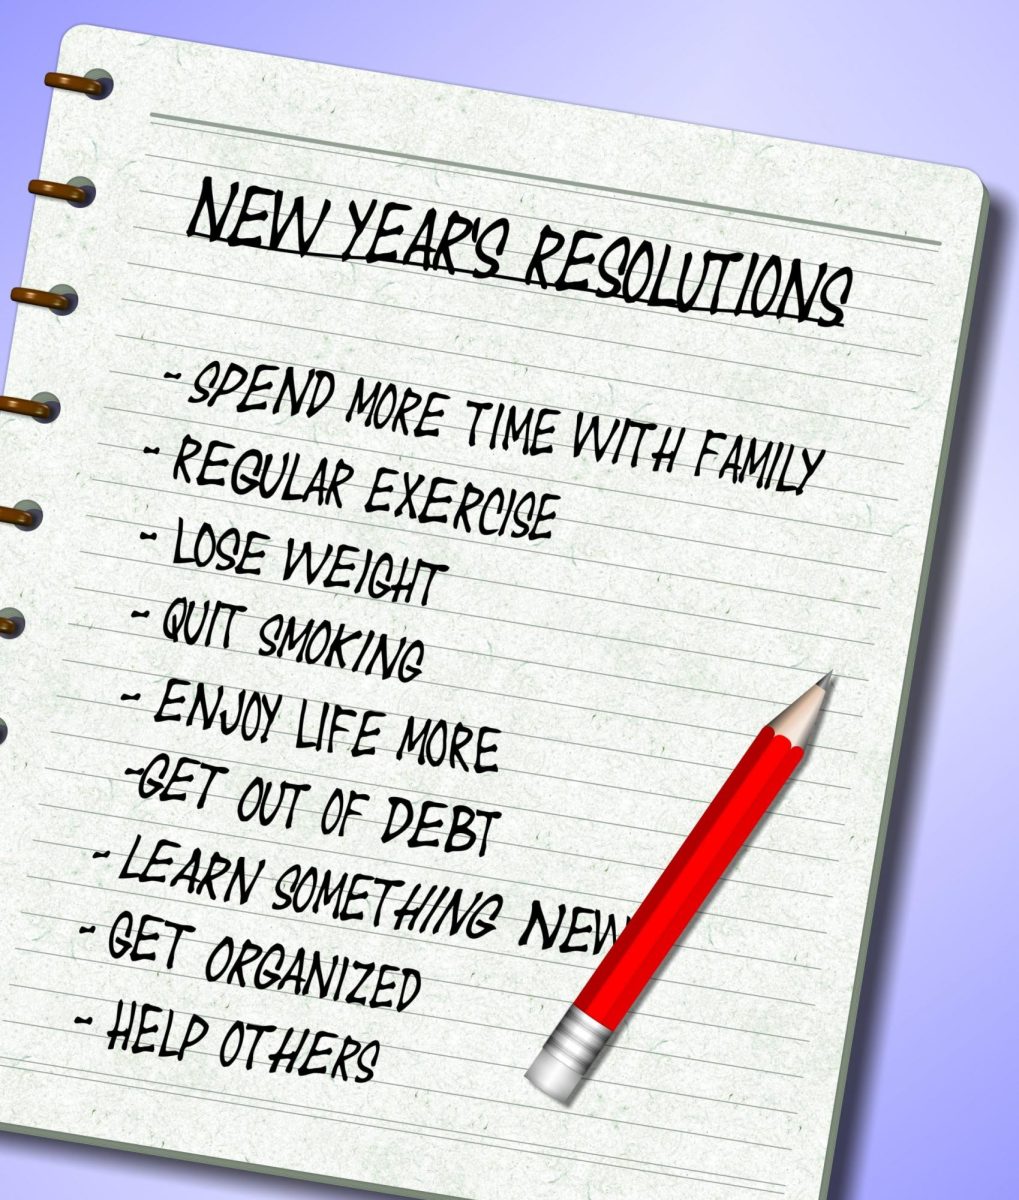 The beauty of easy New Years resolutions